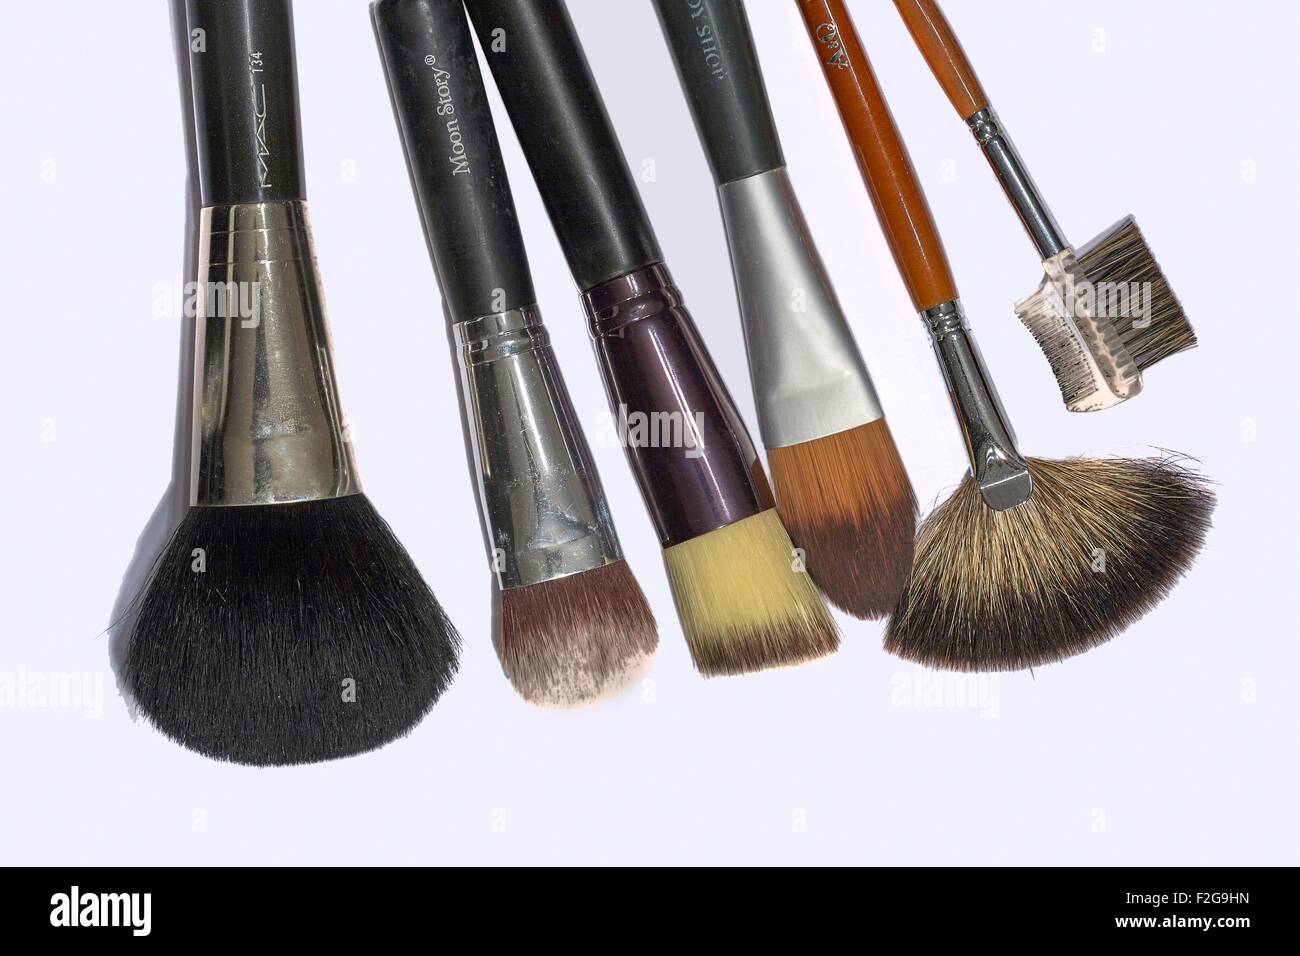 The Wife’s Makeup Brushes Stock Photo